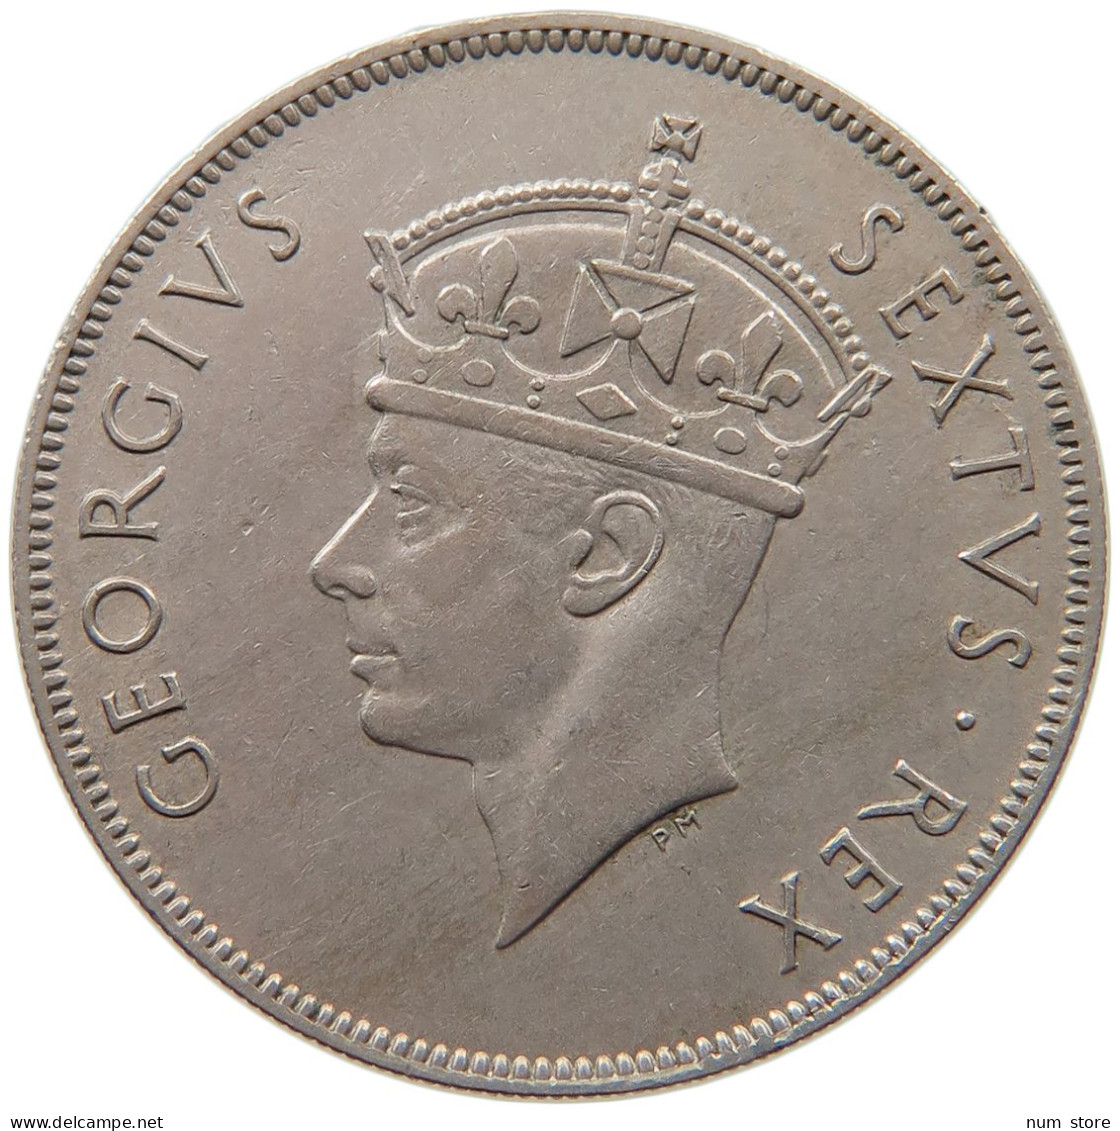 EAST AFRICA SHILLING 1952 #s090 0155 - Colonia Británica